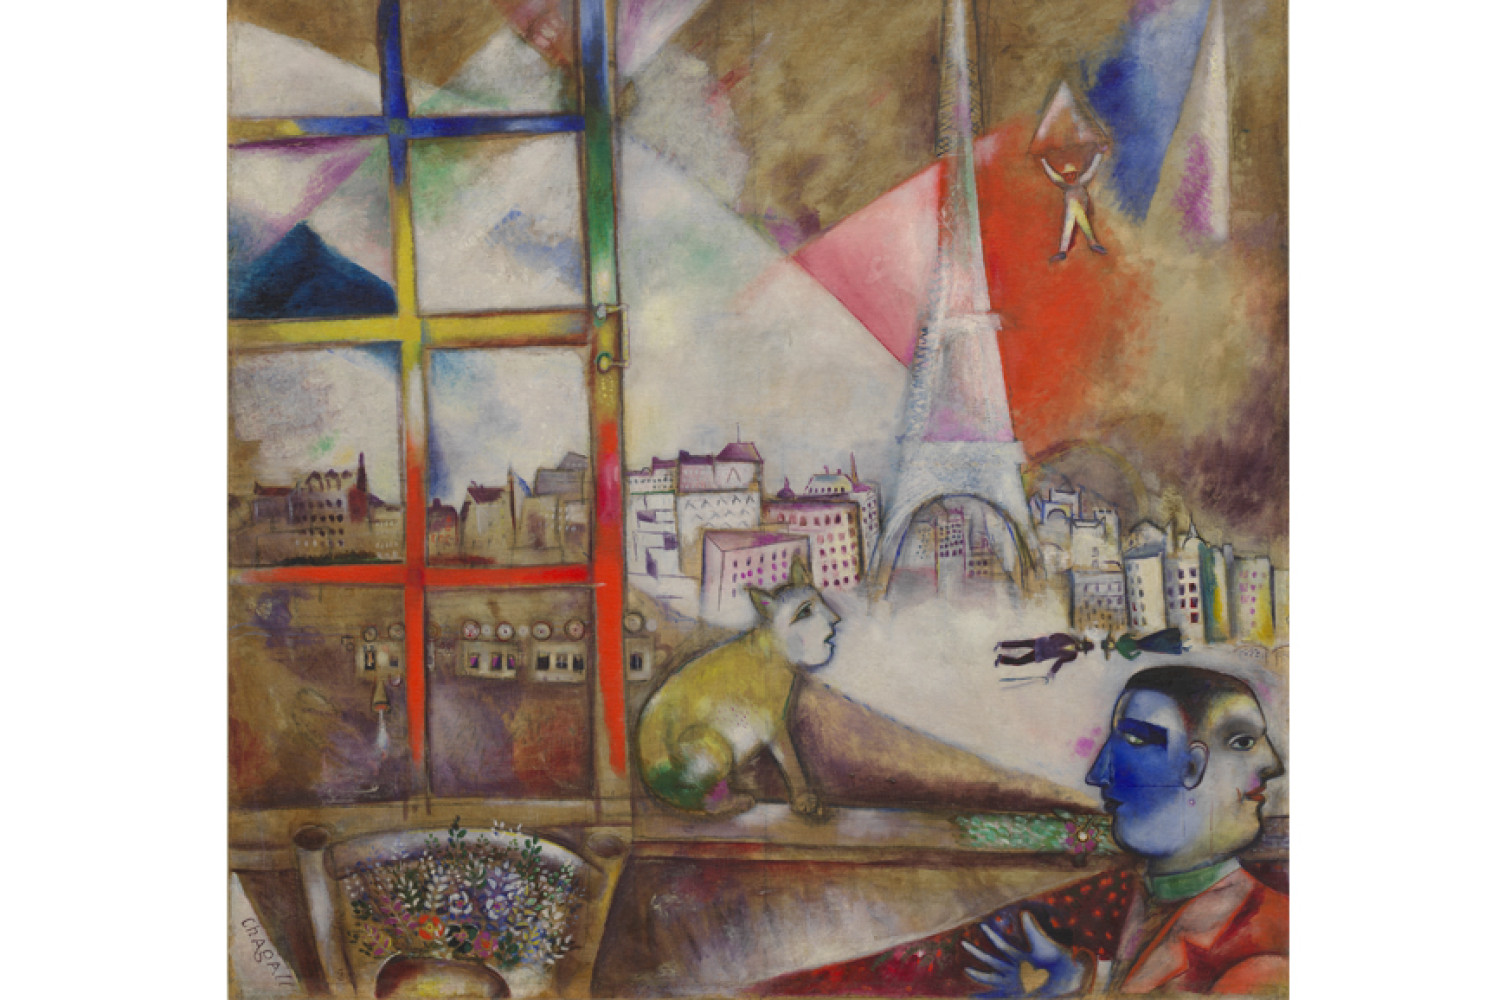 Paris Through the Window, 1913, by Marc Chagall (1887-1985); oil on canvas; 53 9/16 x 55 7/8 inches; Courtesy of the Solomon R. Guggenheim Museum, New York © 2016 Artists Rights Society (ARS), New York / ADAGP, Paris